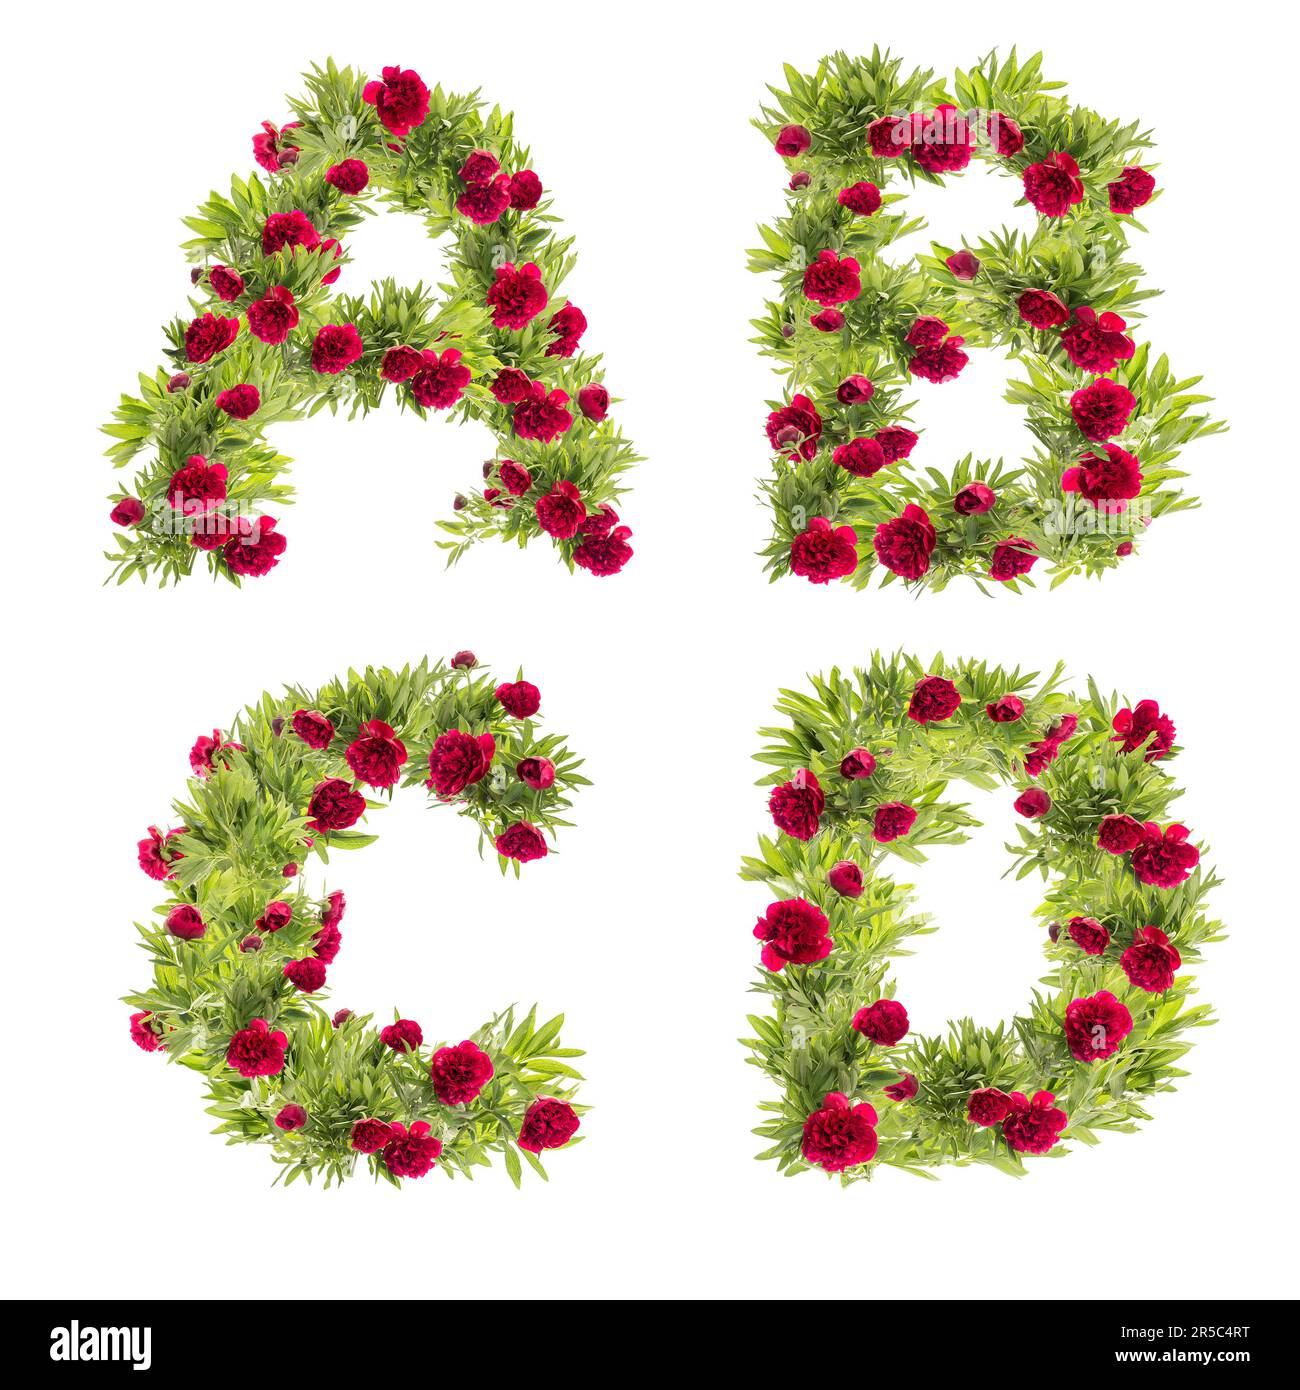 3D illustration of Peony flowers capital letter alphabet - letters A-D Stock Photo